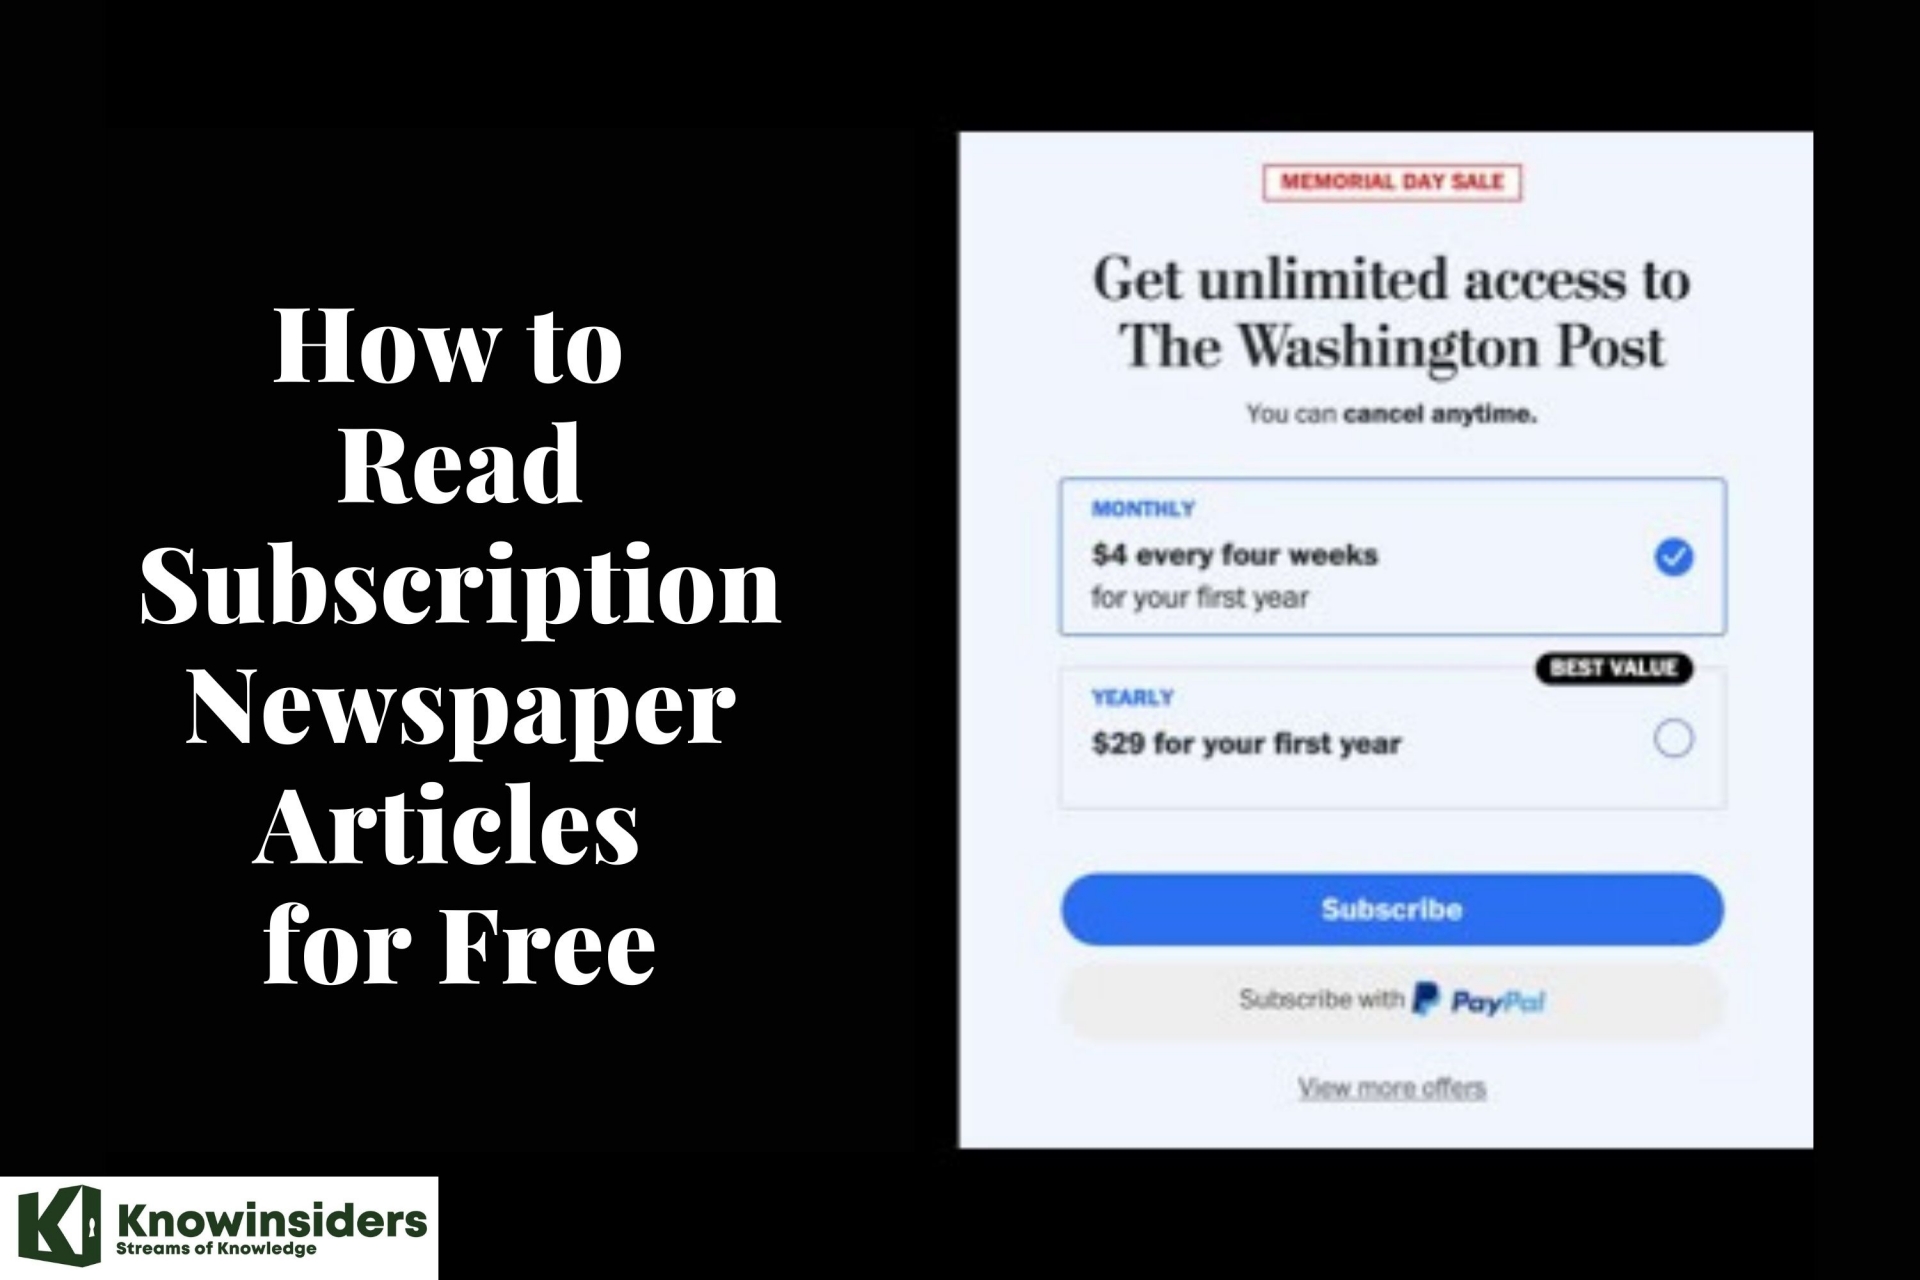 How to Read Subscription Newspaper Articles for Free